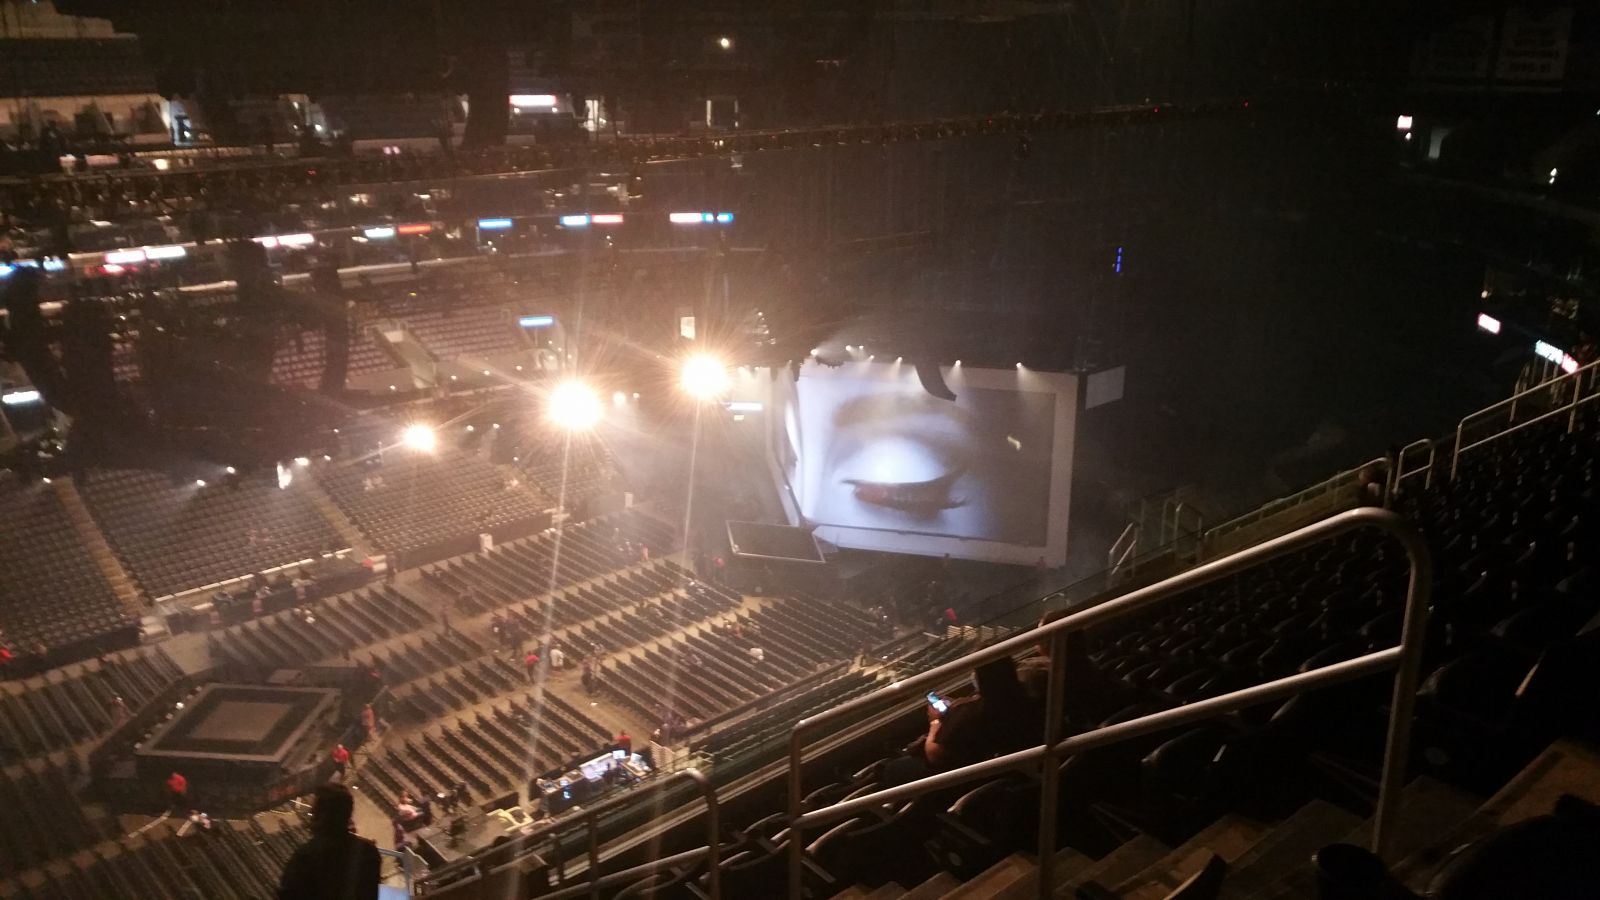 section 303, row 13 seat view  for concert - crypto.com arena